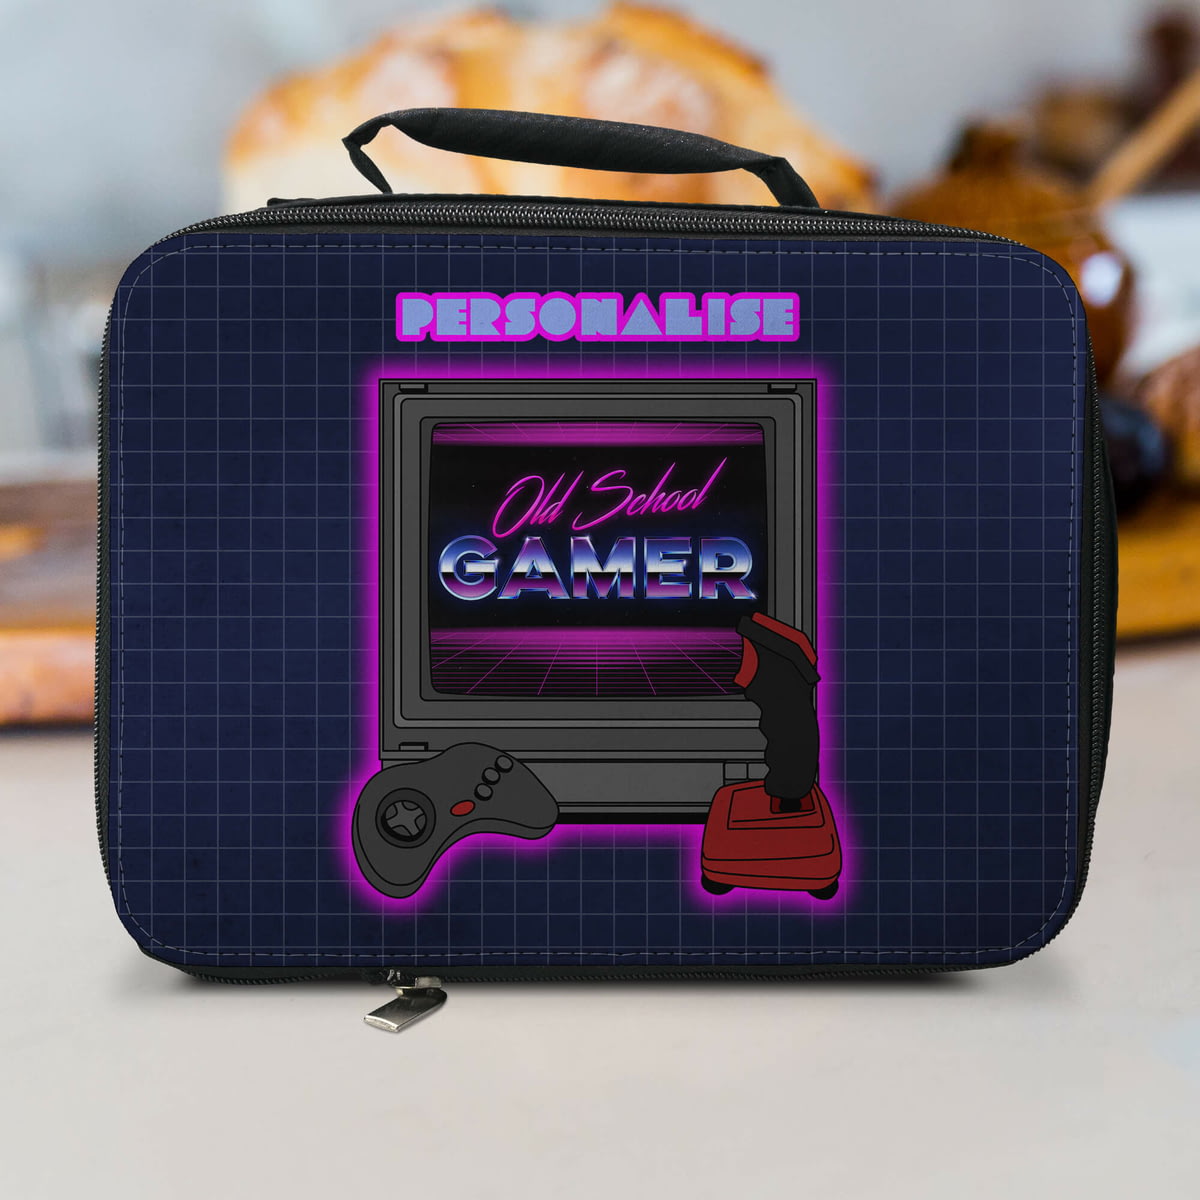 Personalised Old School Gamer Lunch Bag - Black from Go Find A Gift